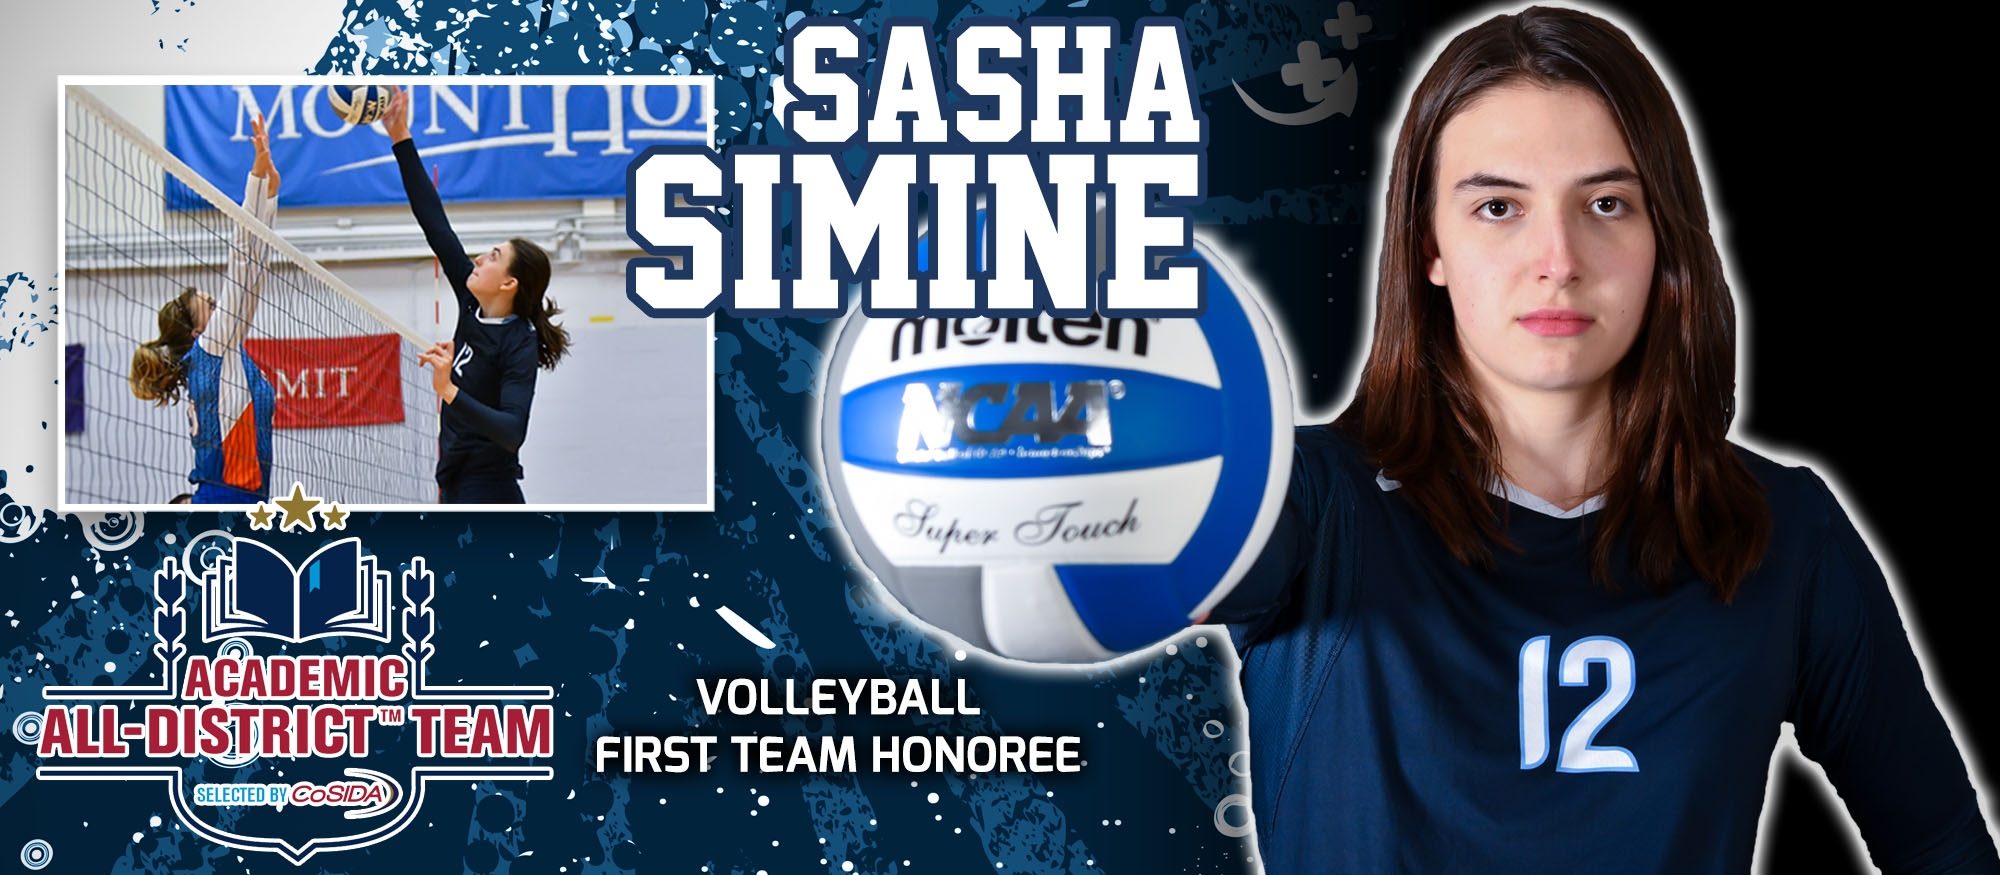 Graphic showcasing sophomore volleyball player, Sasha Simine, who was named to the CoSIDA Academic All-District First Team in volleyball on November 16.